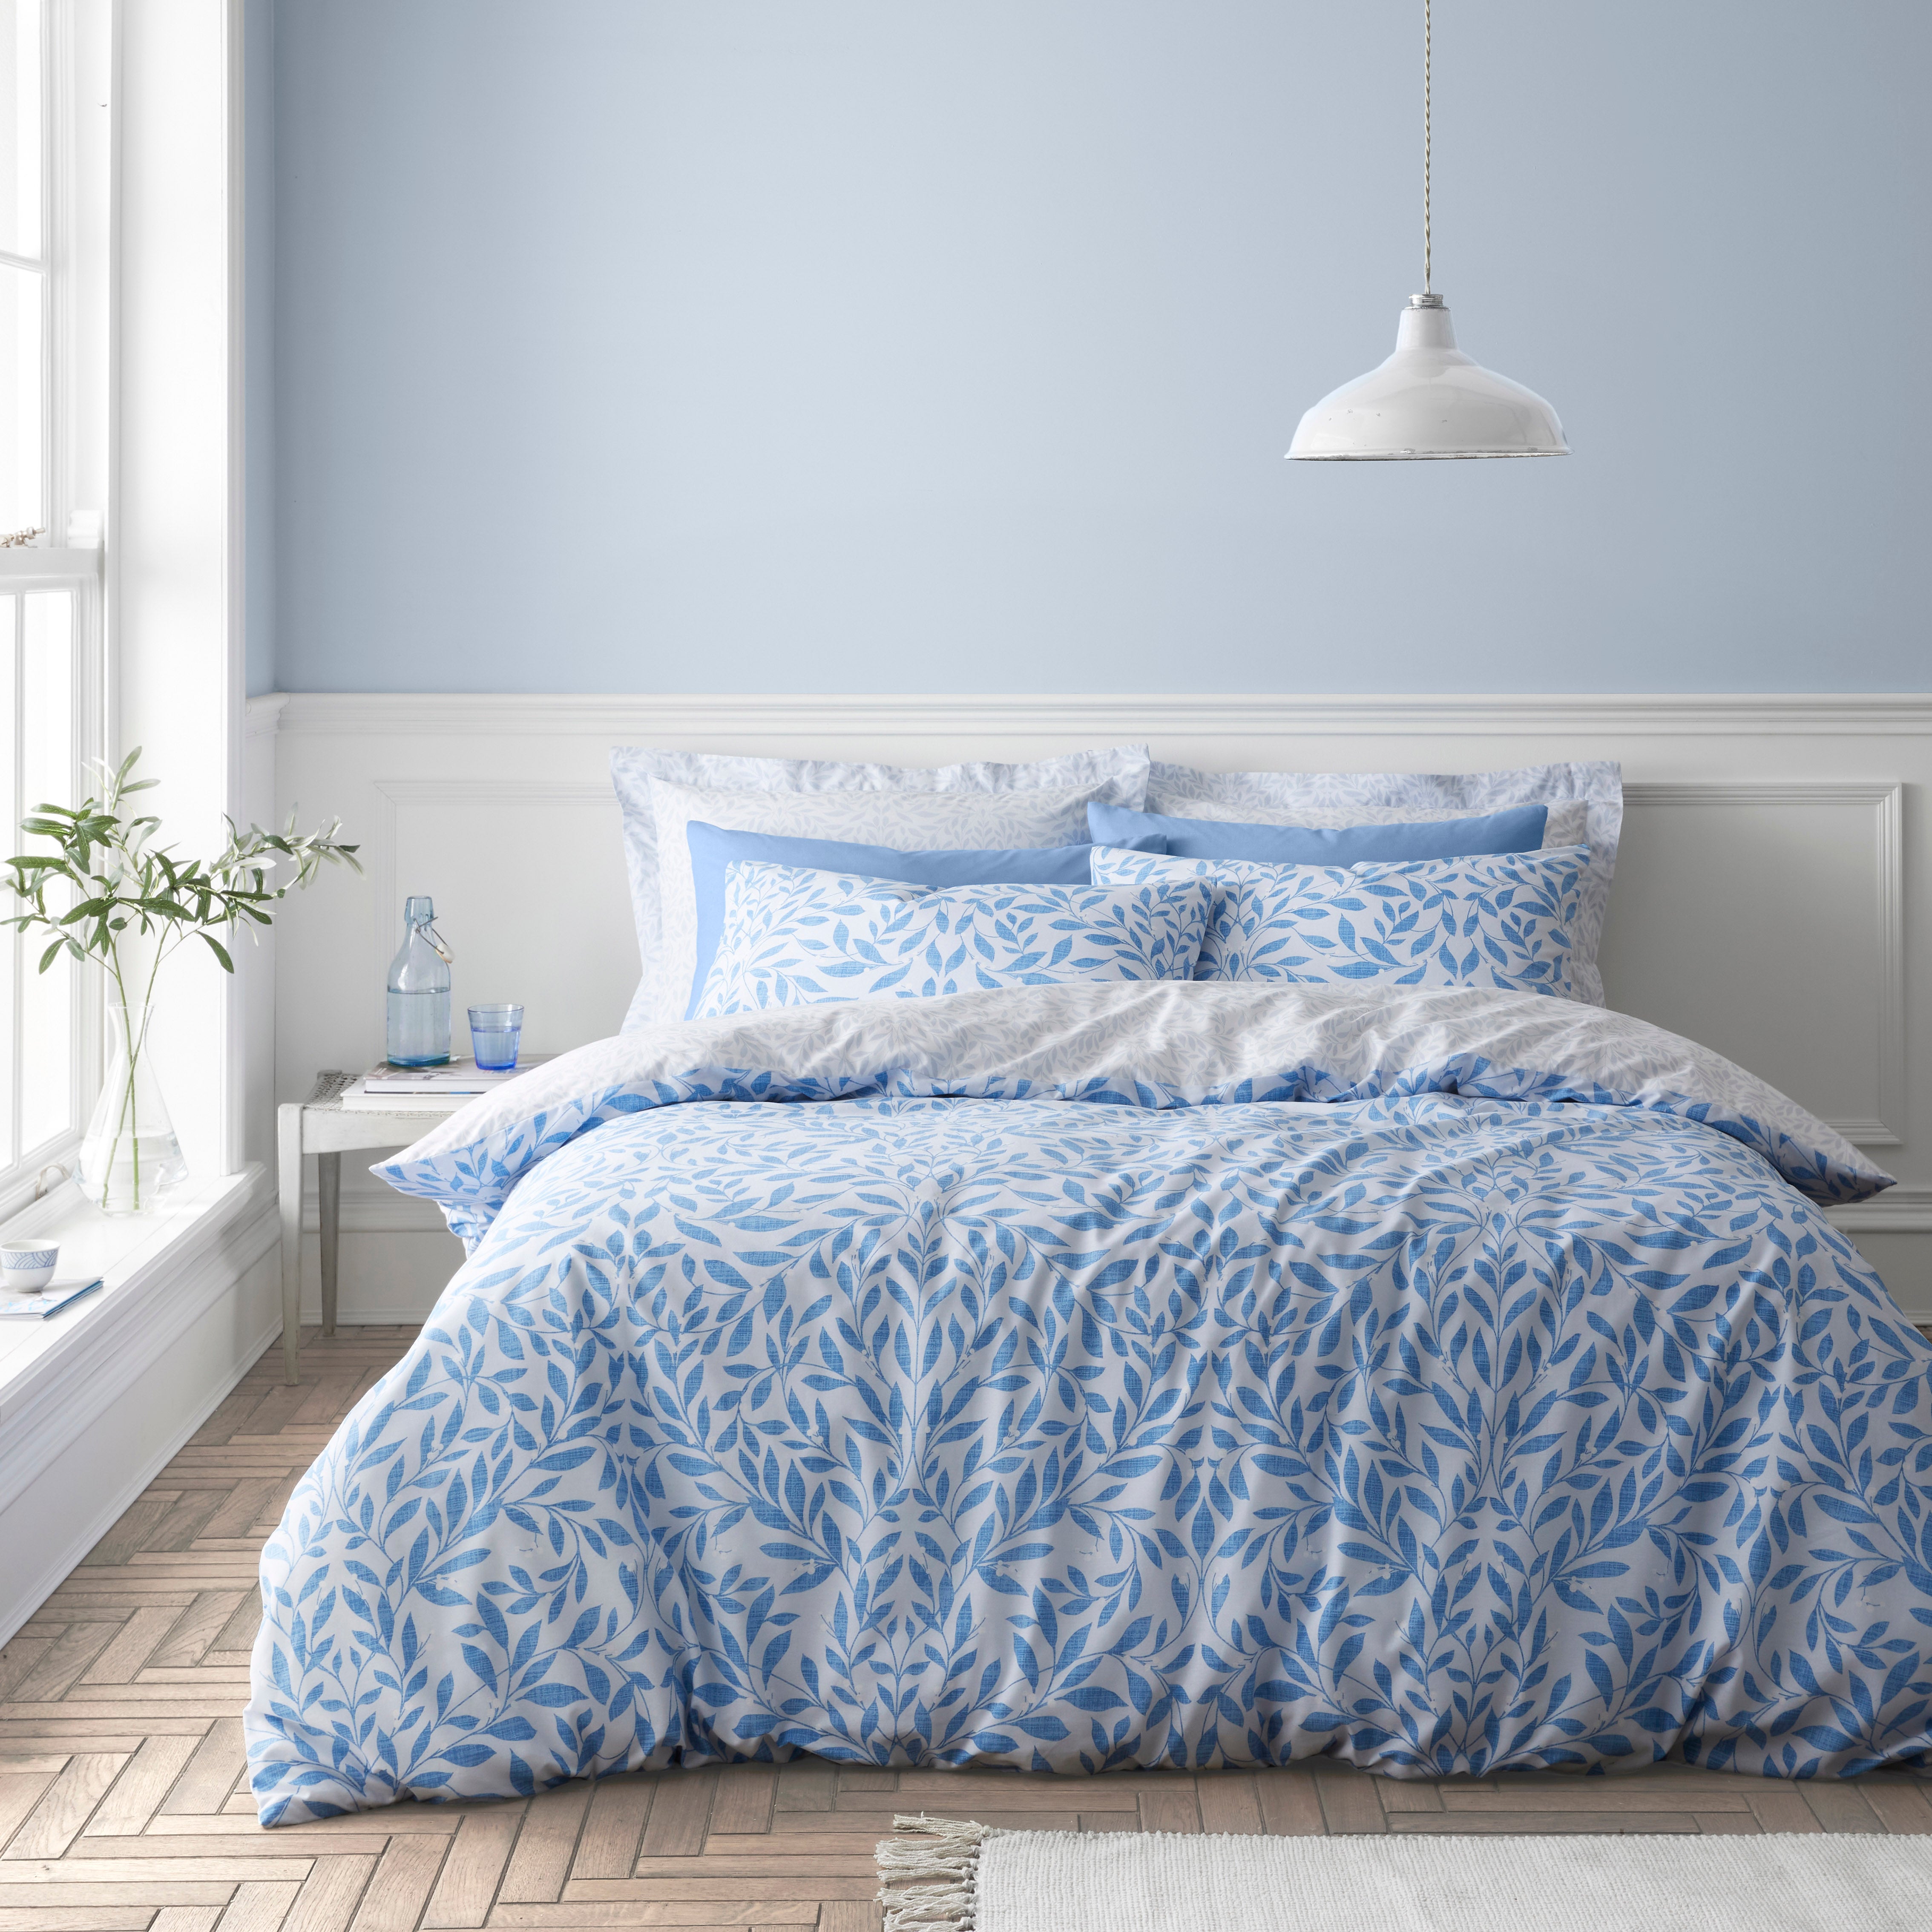 Duvet Covers & Sets - Bedding Collections | Dunelm | Page 7